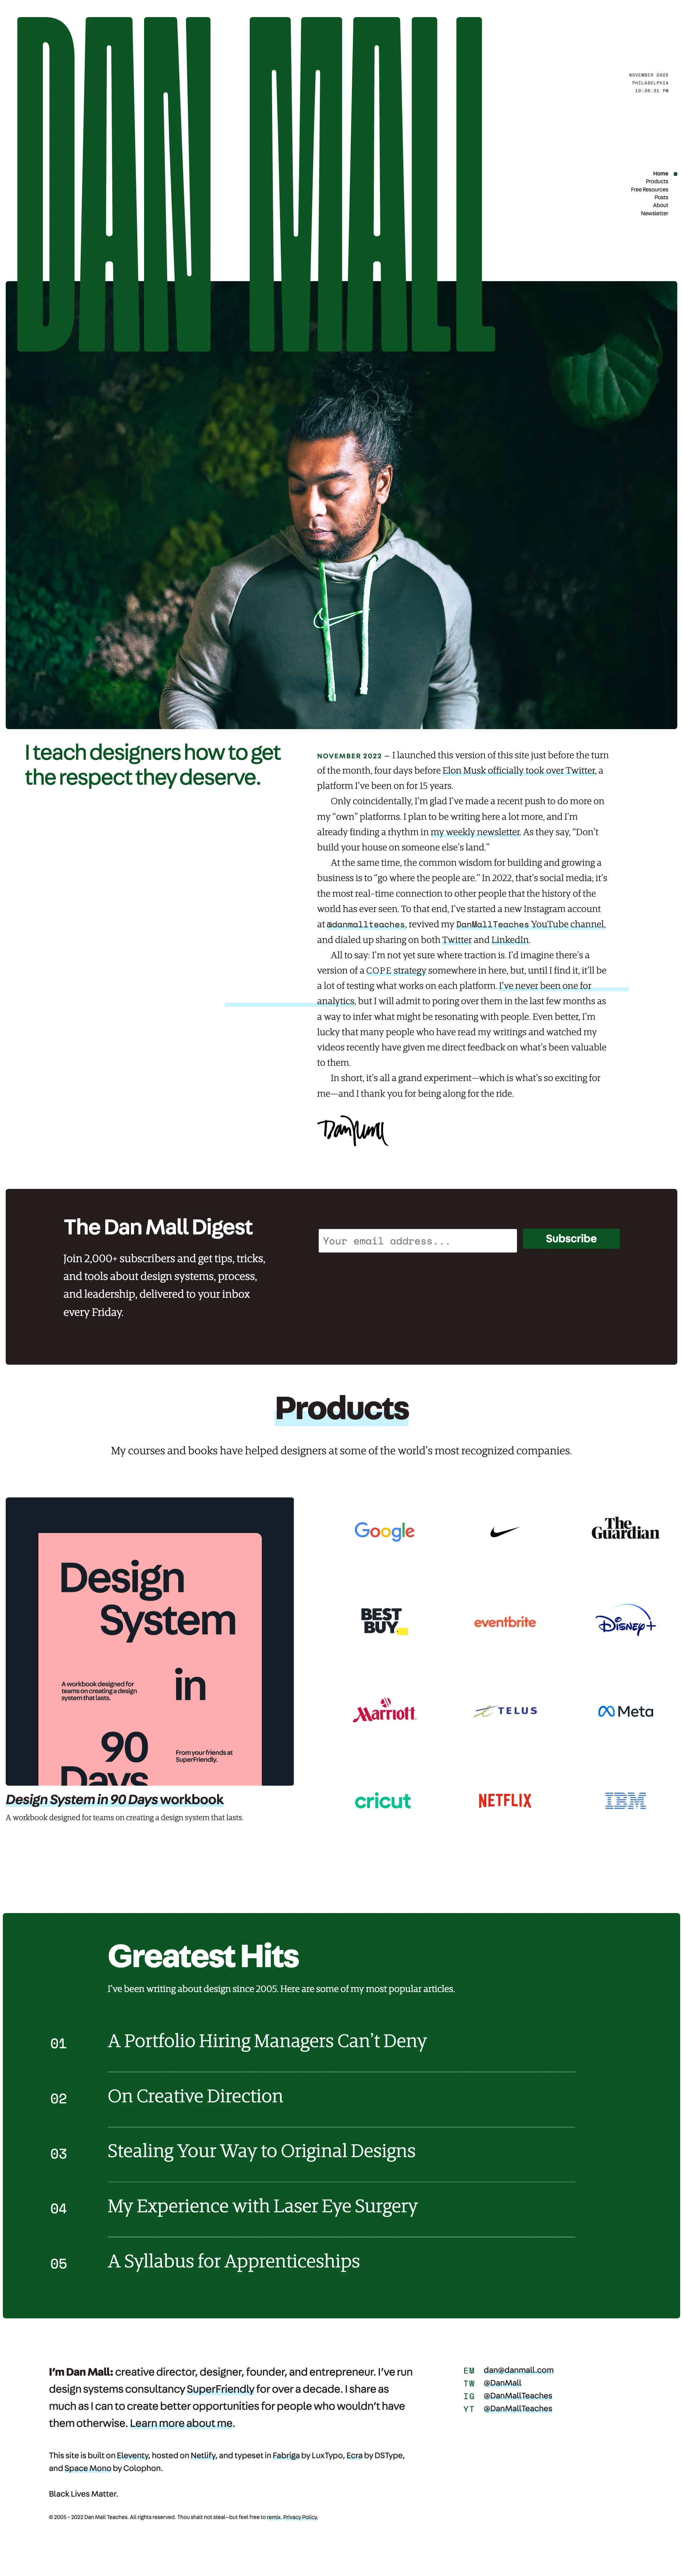 Dan Mall Landing Page Example: Tips and tricks about growing as a designer. I teach designers how to get the respect they deserve.